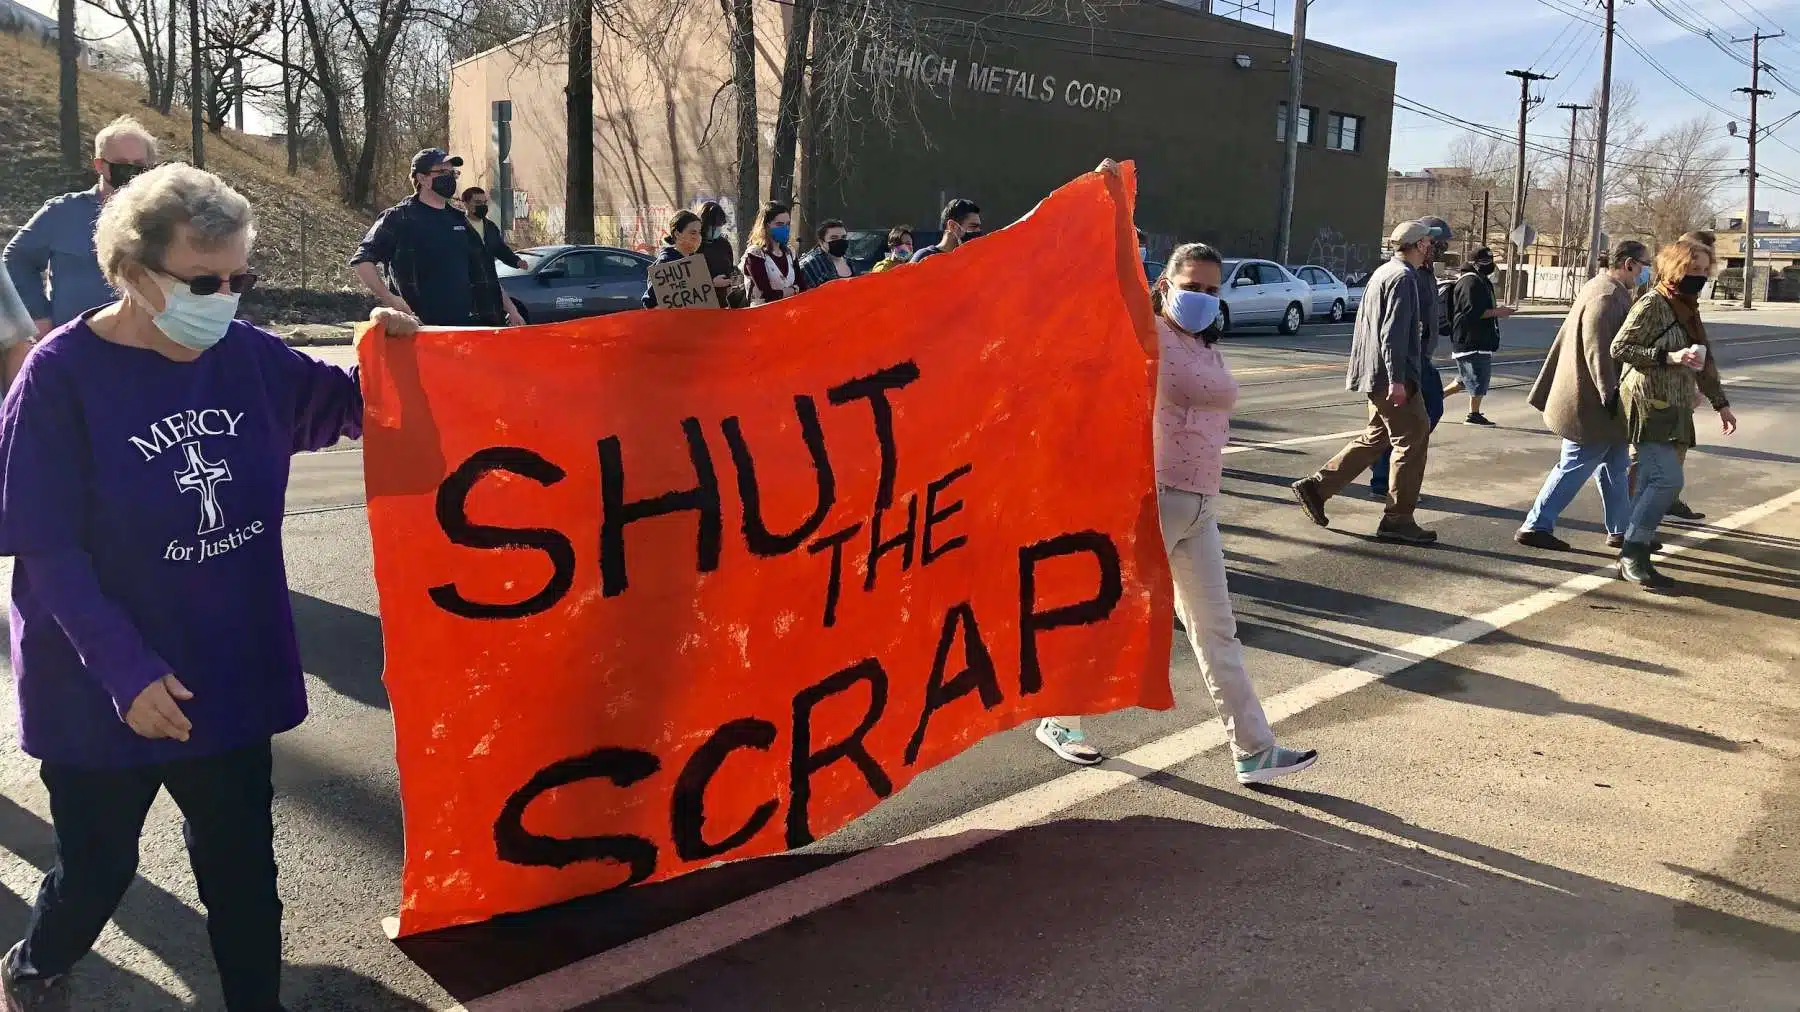 Rhode Island News: People’s Port Authority rallies to shut down scrap metal yard and all toxic industries in the Port